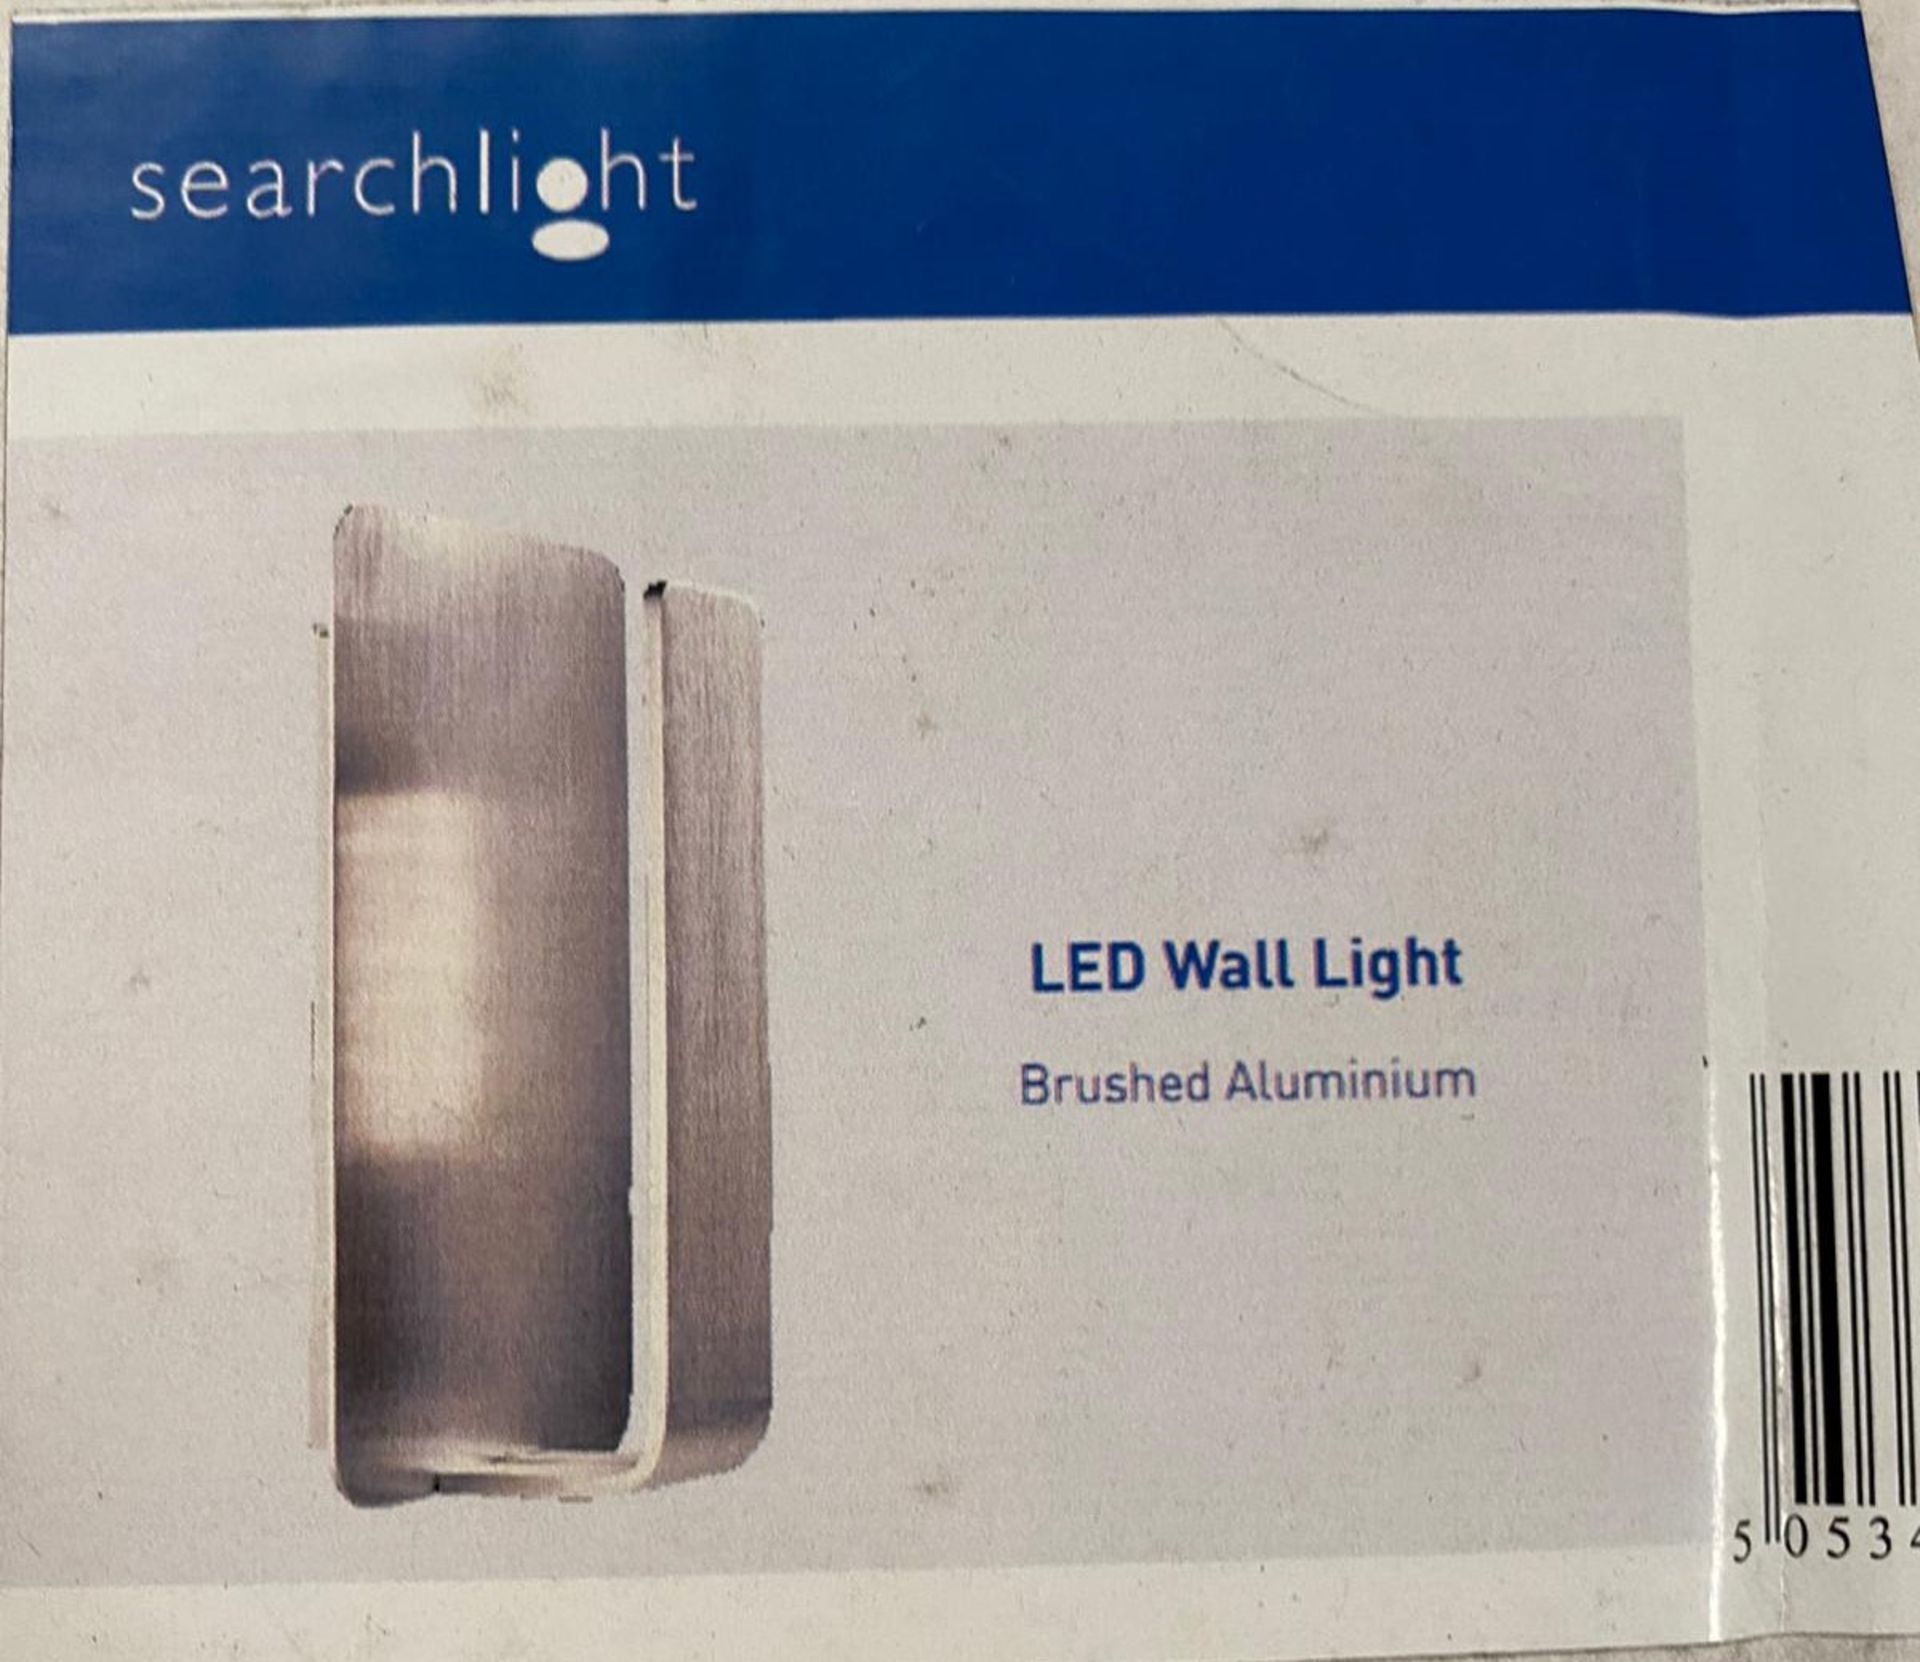 2 x Searchlight LED Wall Light in Brushed Aluminium - Ref: 1898SI - New and Boxed - RRP: £70(each) - Image 2 of 4